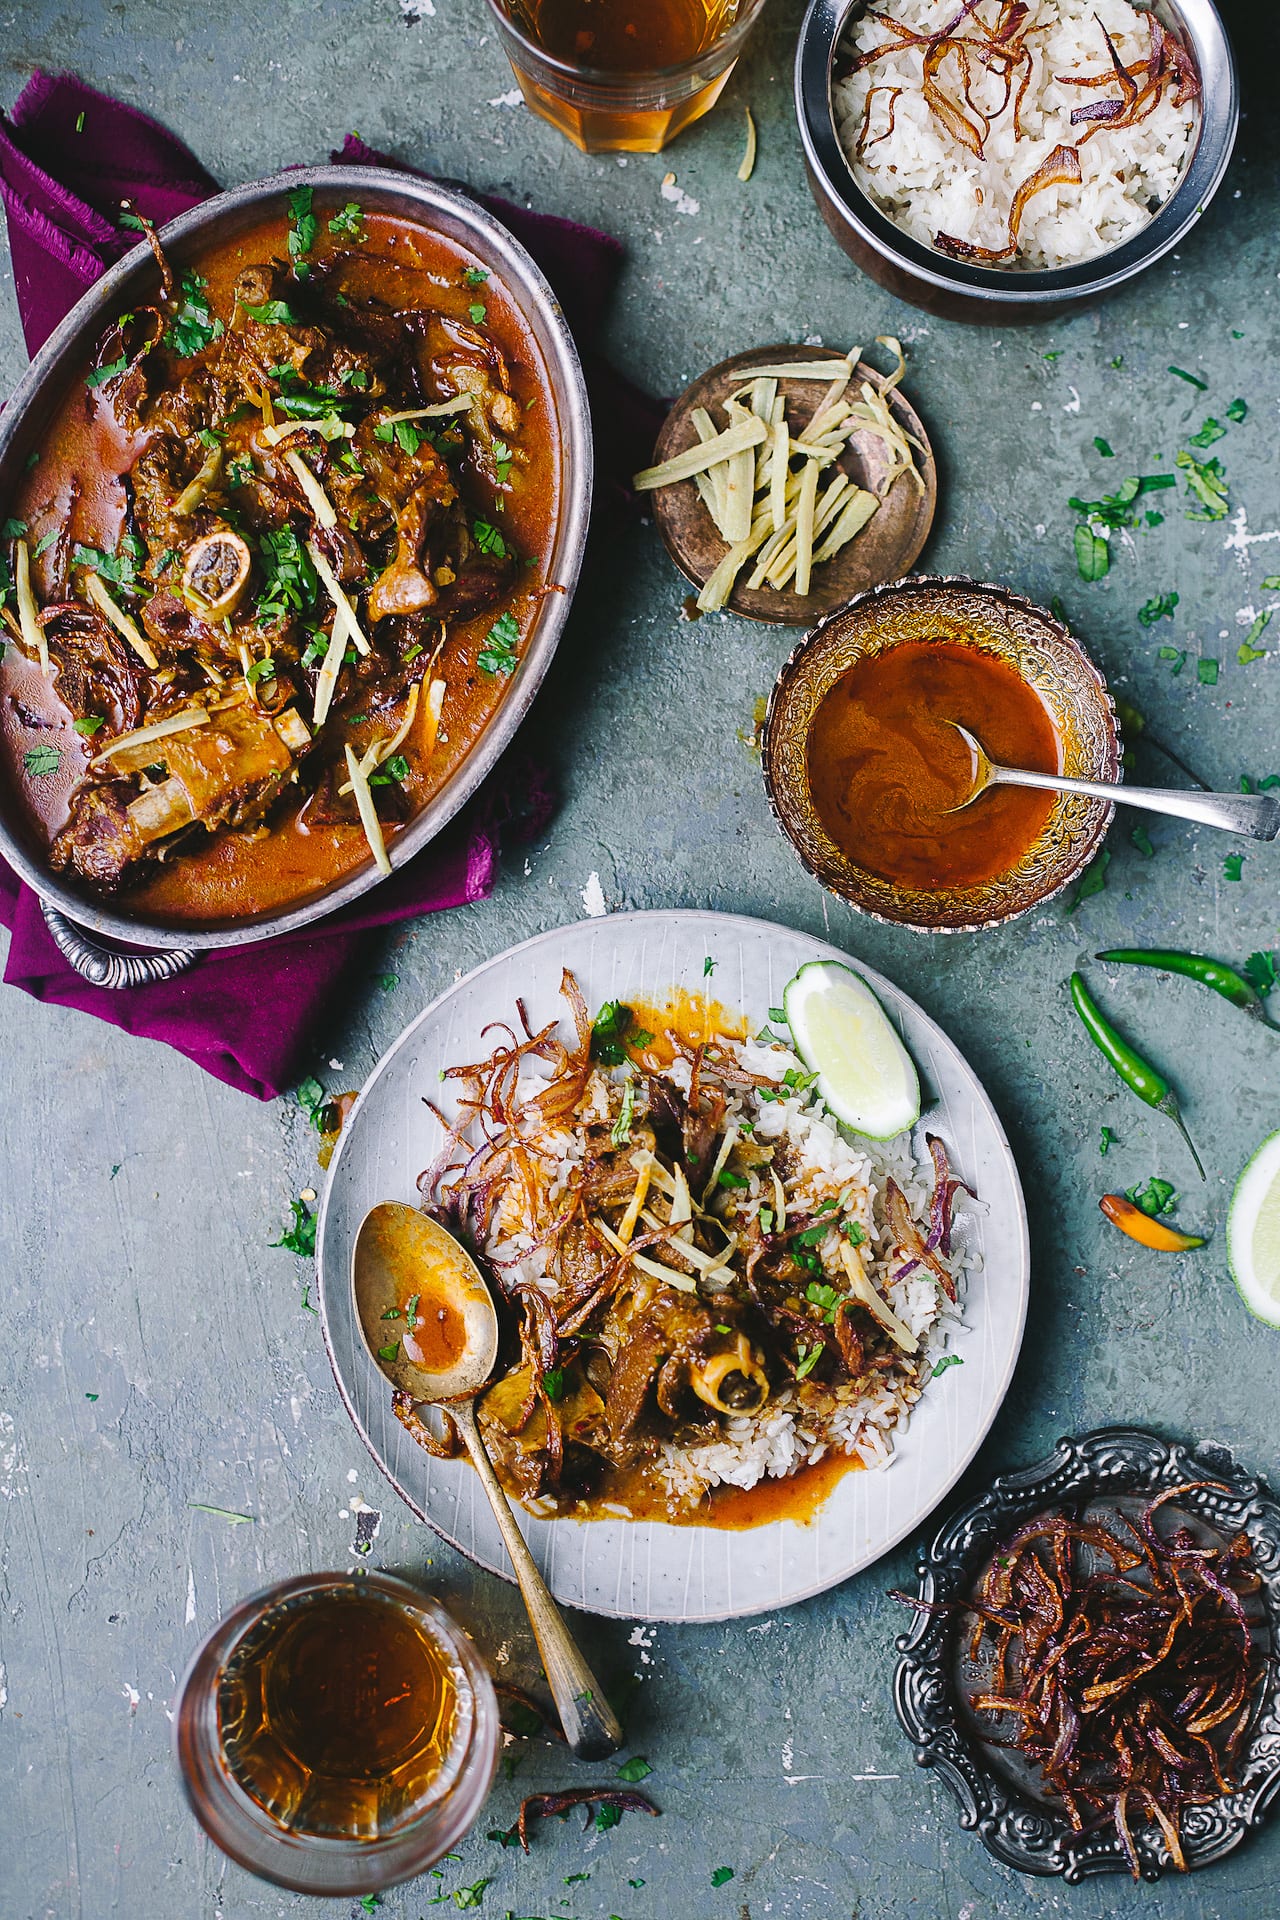 Mutton Nihari (Spiced Goat Stew) | Playful Cooking #indianfood #foodphotography #mutton #curry #meat